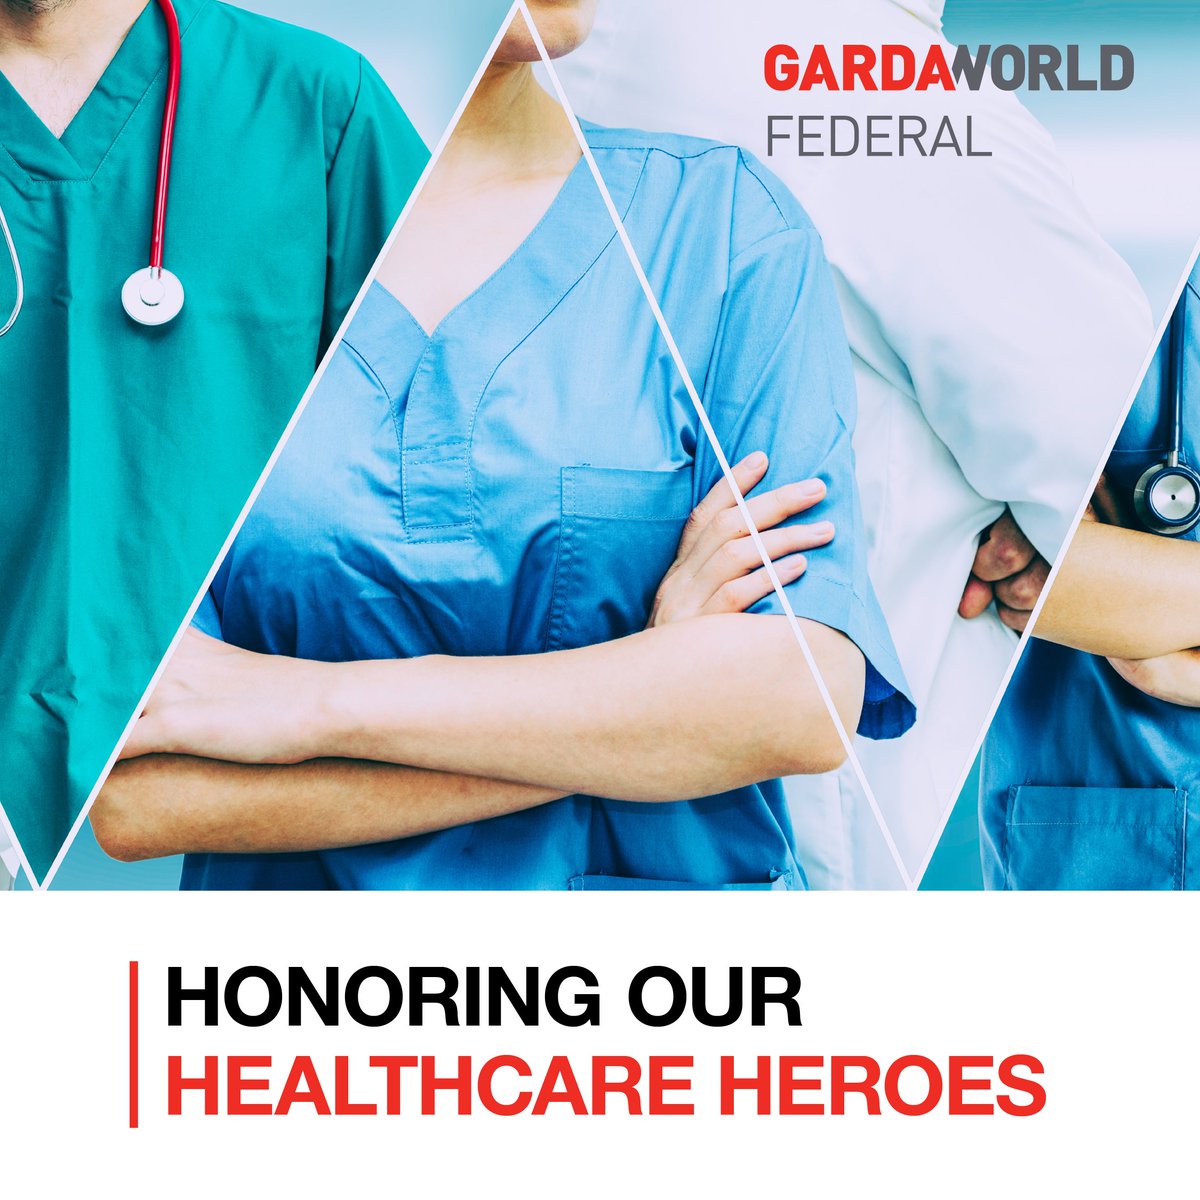 On International Nurses' Day, GardaWorld Federal extends heartfelt gratitude to nurses worldwide. Your dedication, compassion, and resilience inspire us all. 

Thank you for your unwavering commitment to healing and care.

#NursesDay #HealthcareHeroes #Gratitude